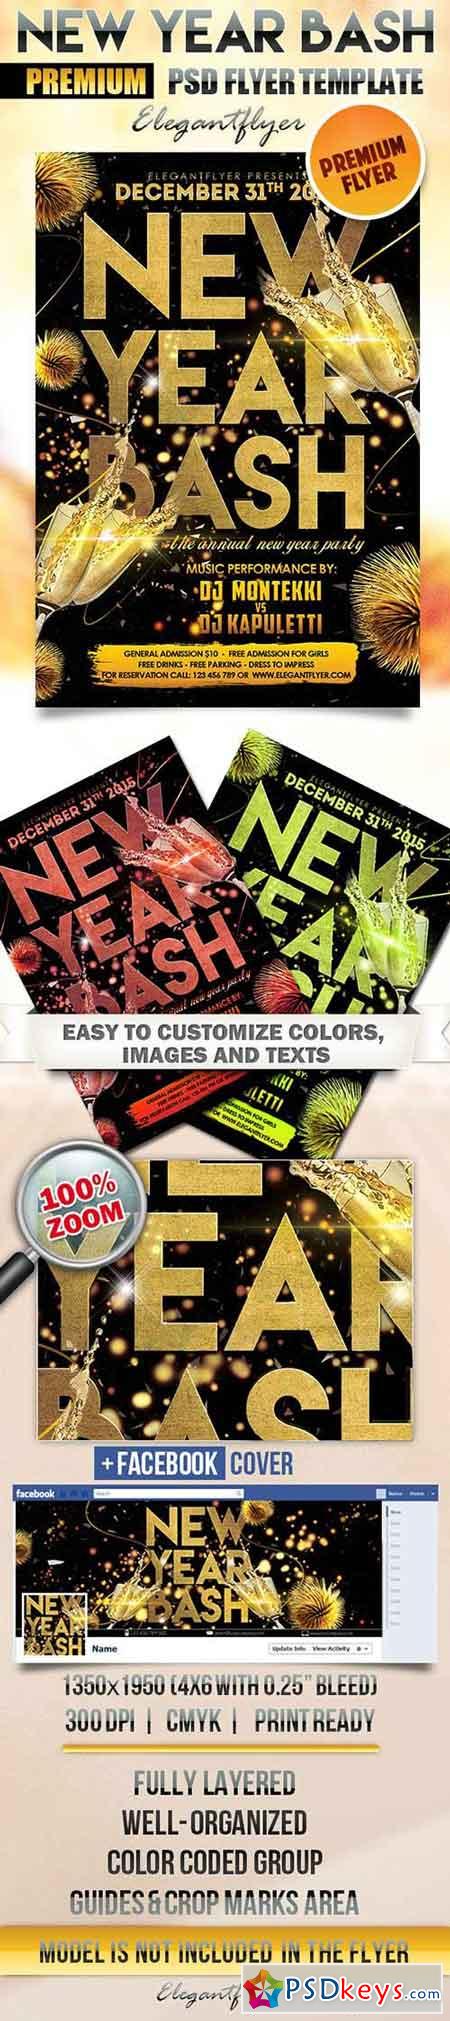 New Year Bash Flyer PSD Template + Facebook Cover